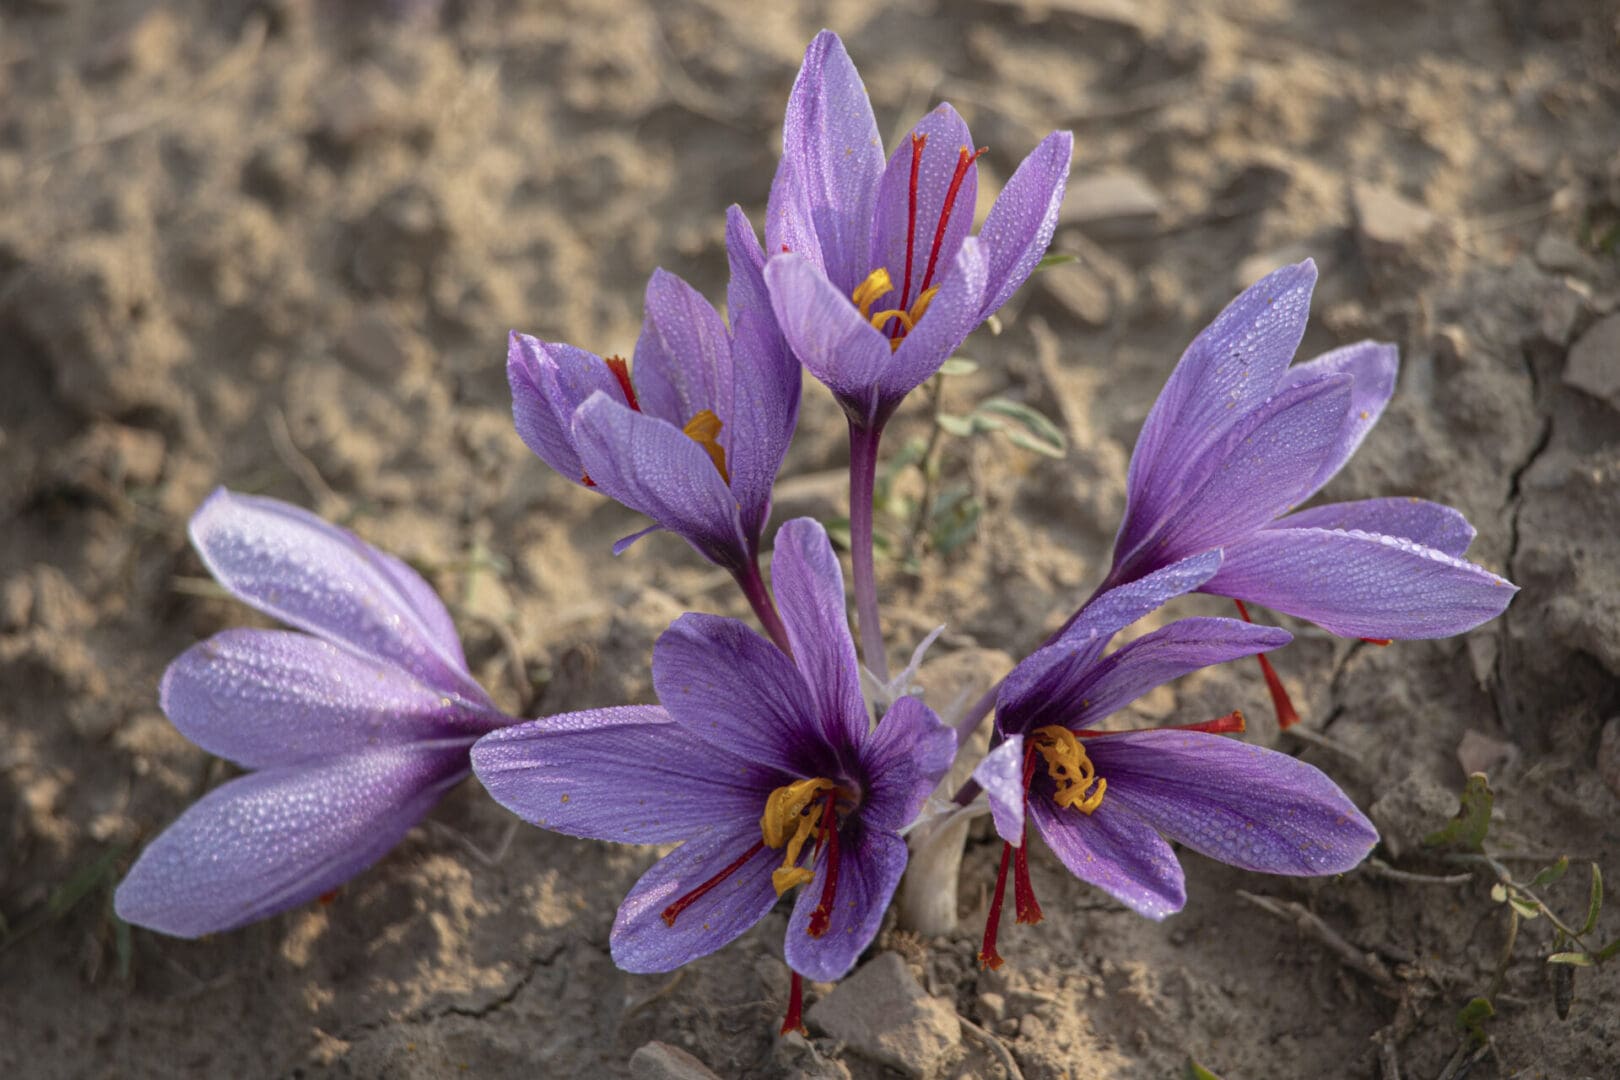 Saffron flowers growing in the dirt.